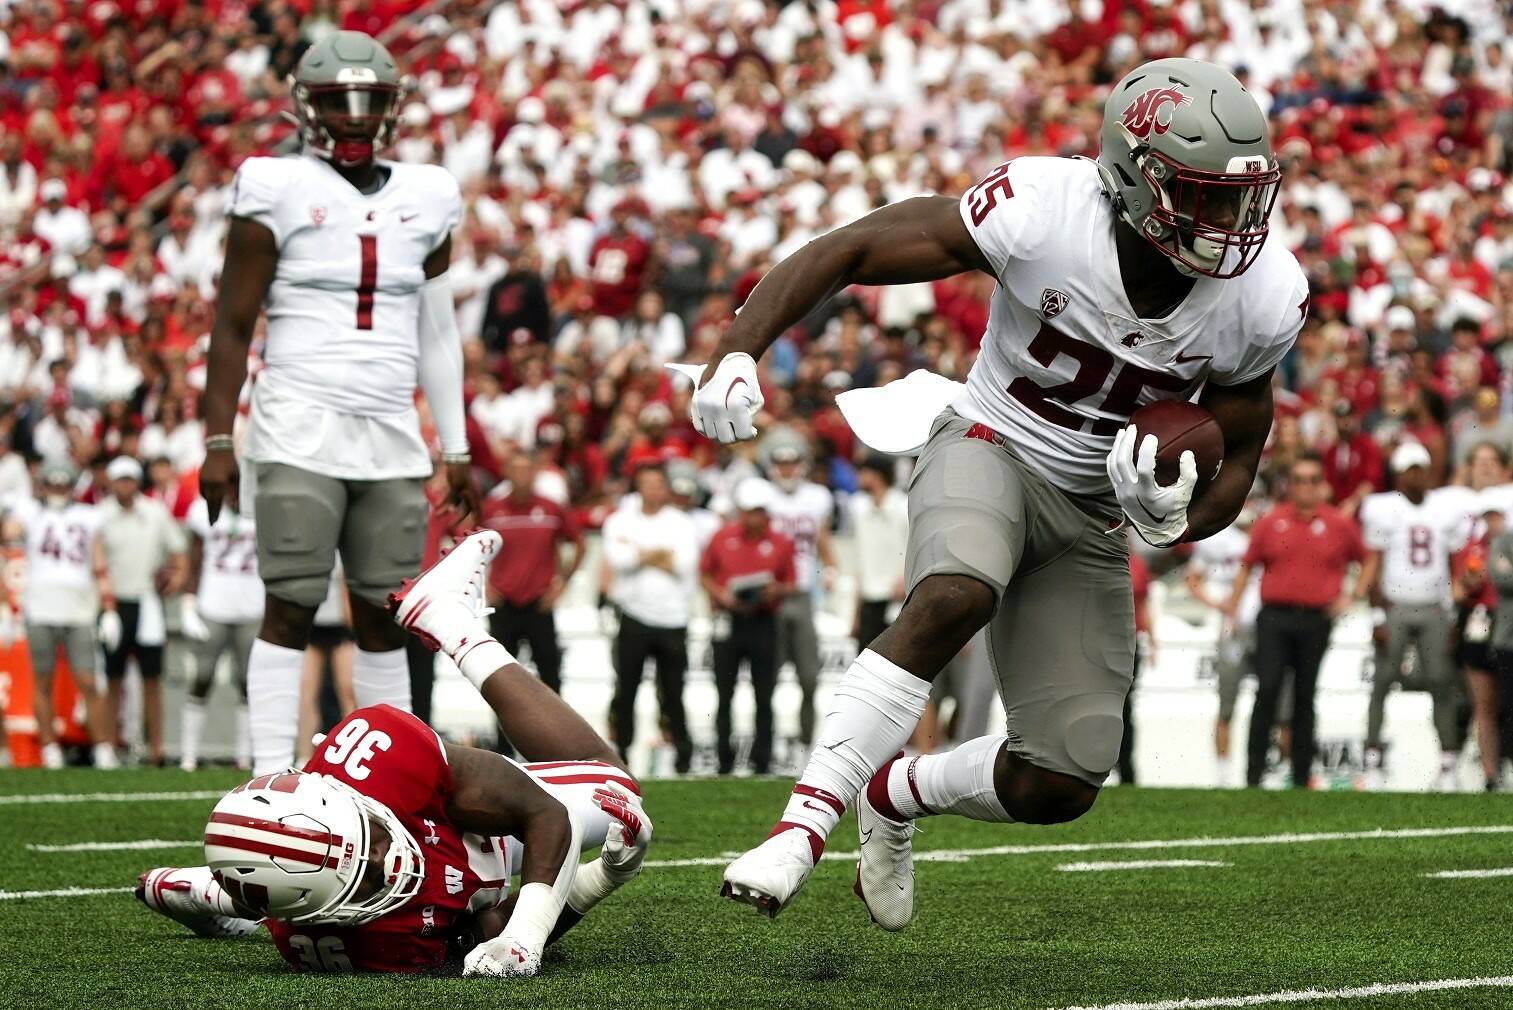 Washington State's Nakia Watson (25) runs past Wisconsin's Jake Chaney (36) during the first half of an NCAA college football game Saturday in Madison, Wis. (AP Photo/Morry Gash)